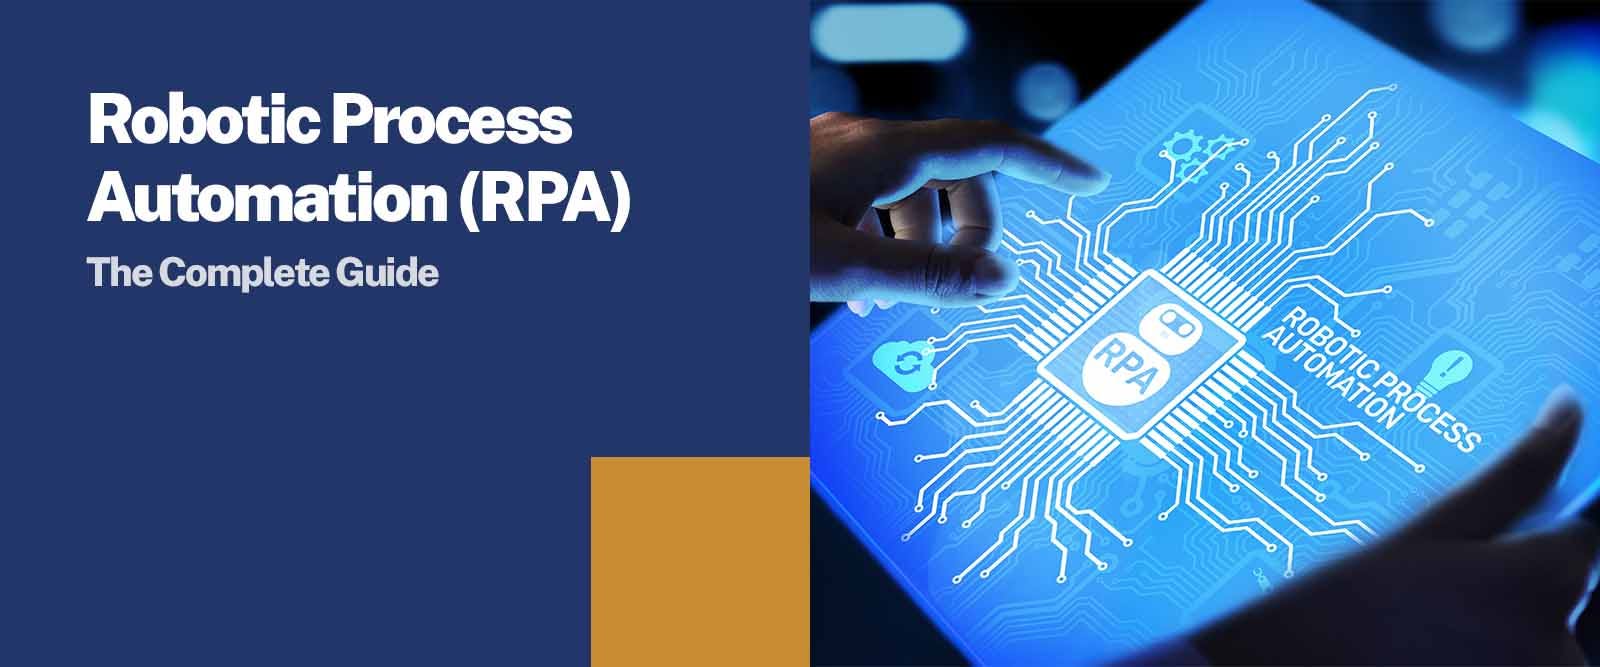 Robotic Process Automation (RPA) The Complete Guide